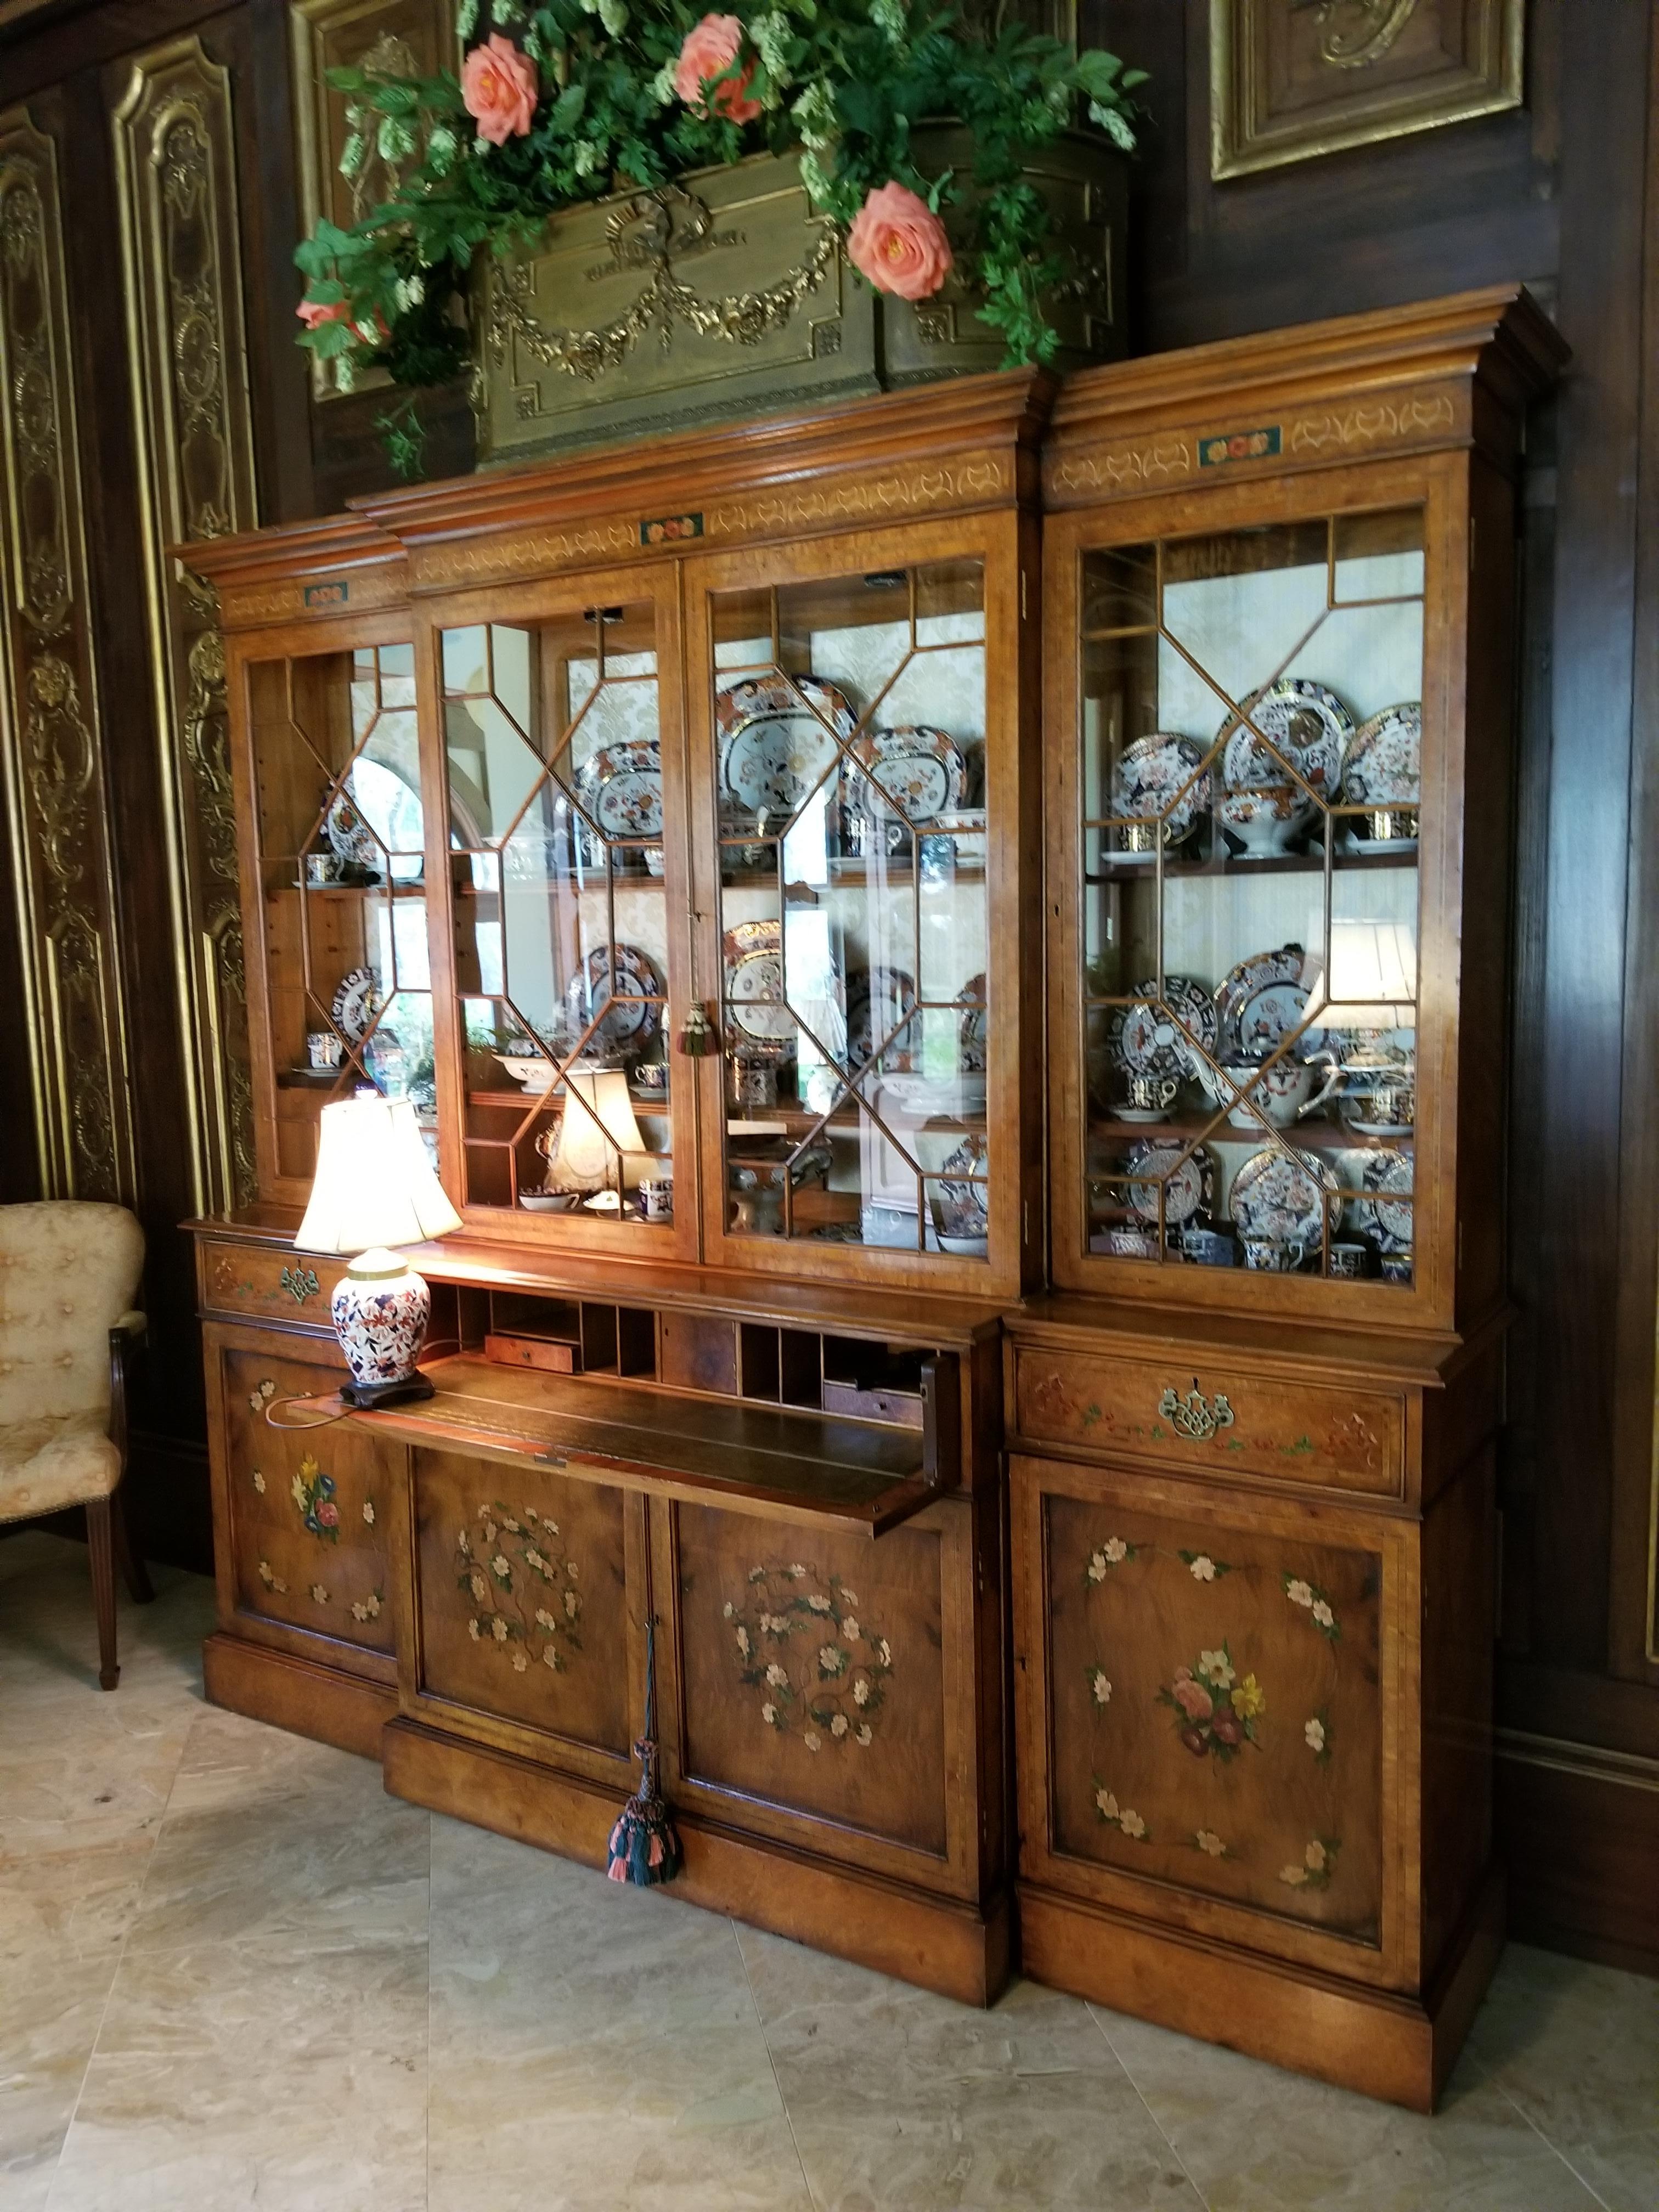 20th century burl walnut breakfront secretary in three sections. Four doors in top section and four doors at bottom section. Pull out secretary and two small drawers. Each glass panel is individually fitted. Each section has a light. All decorative